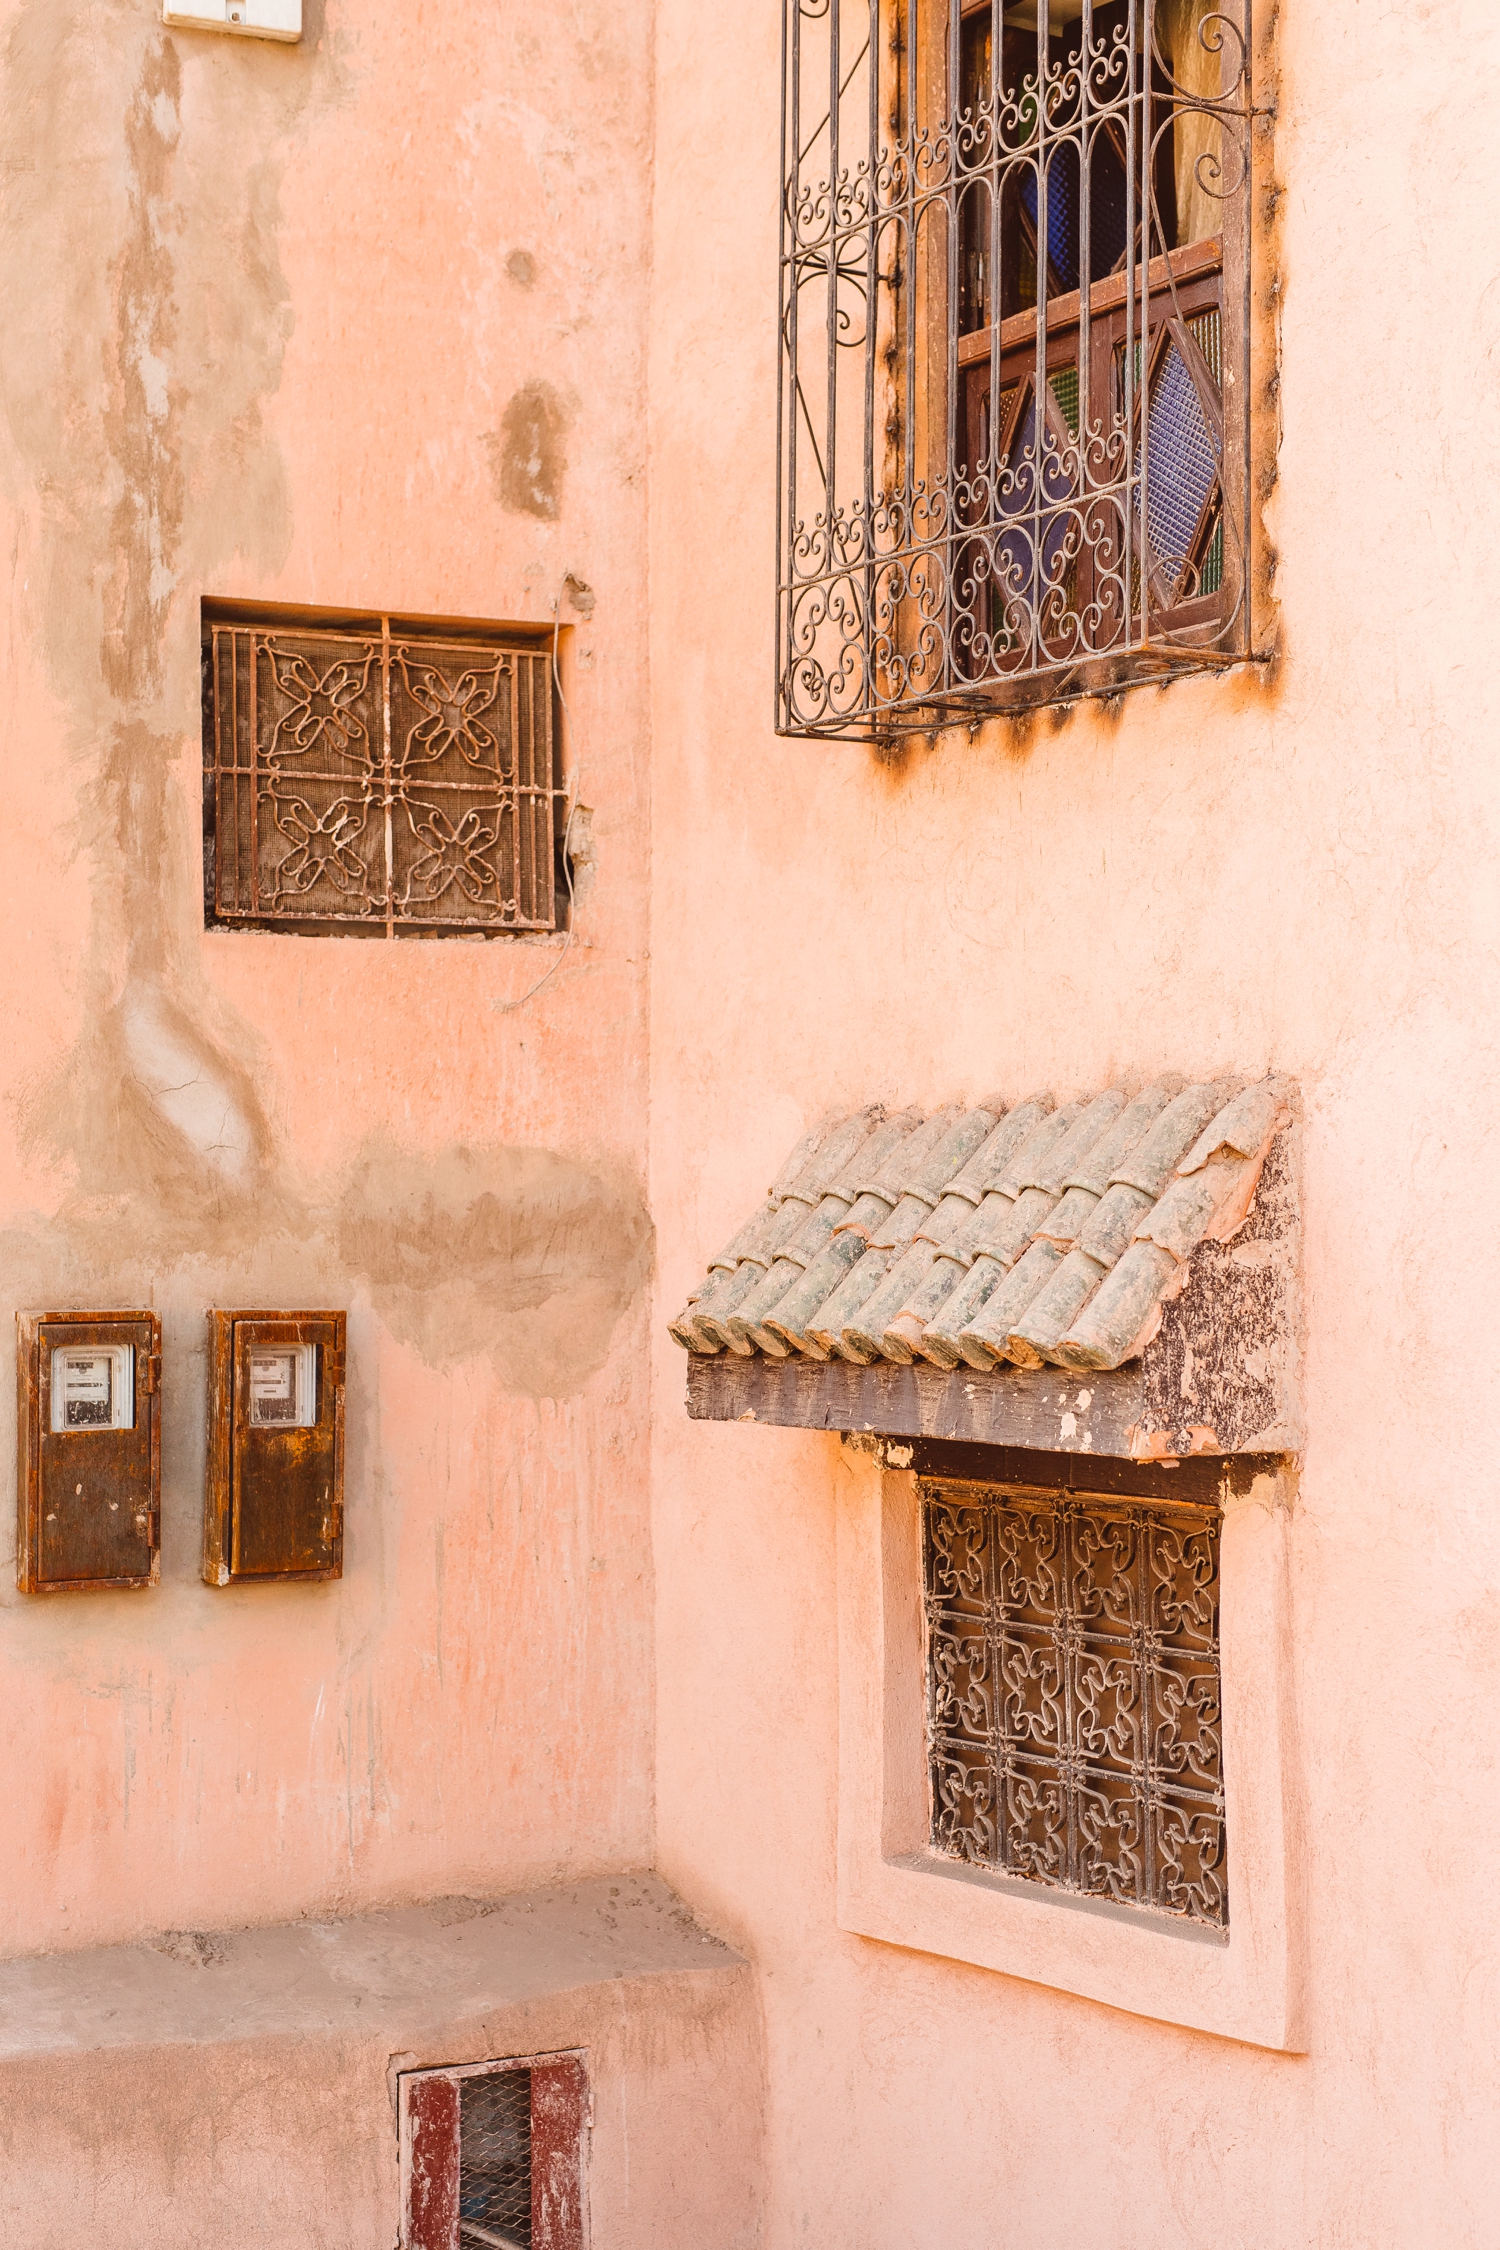 Pink building with intricate metal window covers in Marrakesh, Morocco | Brooke Michelle Photography